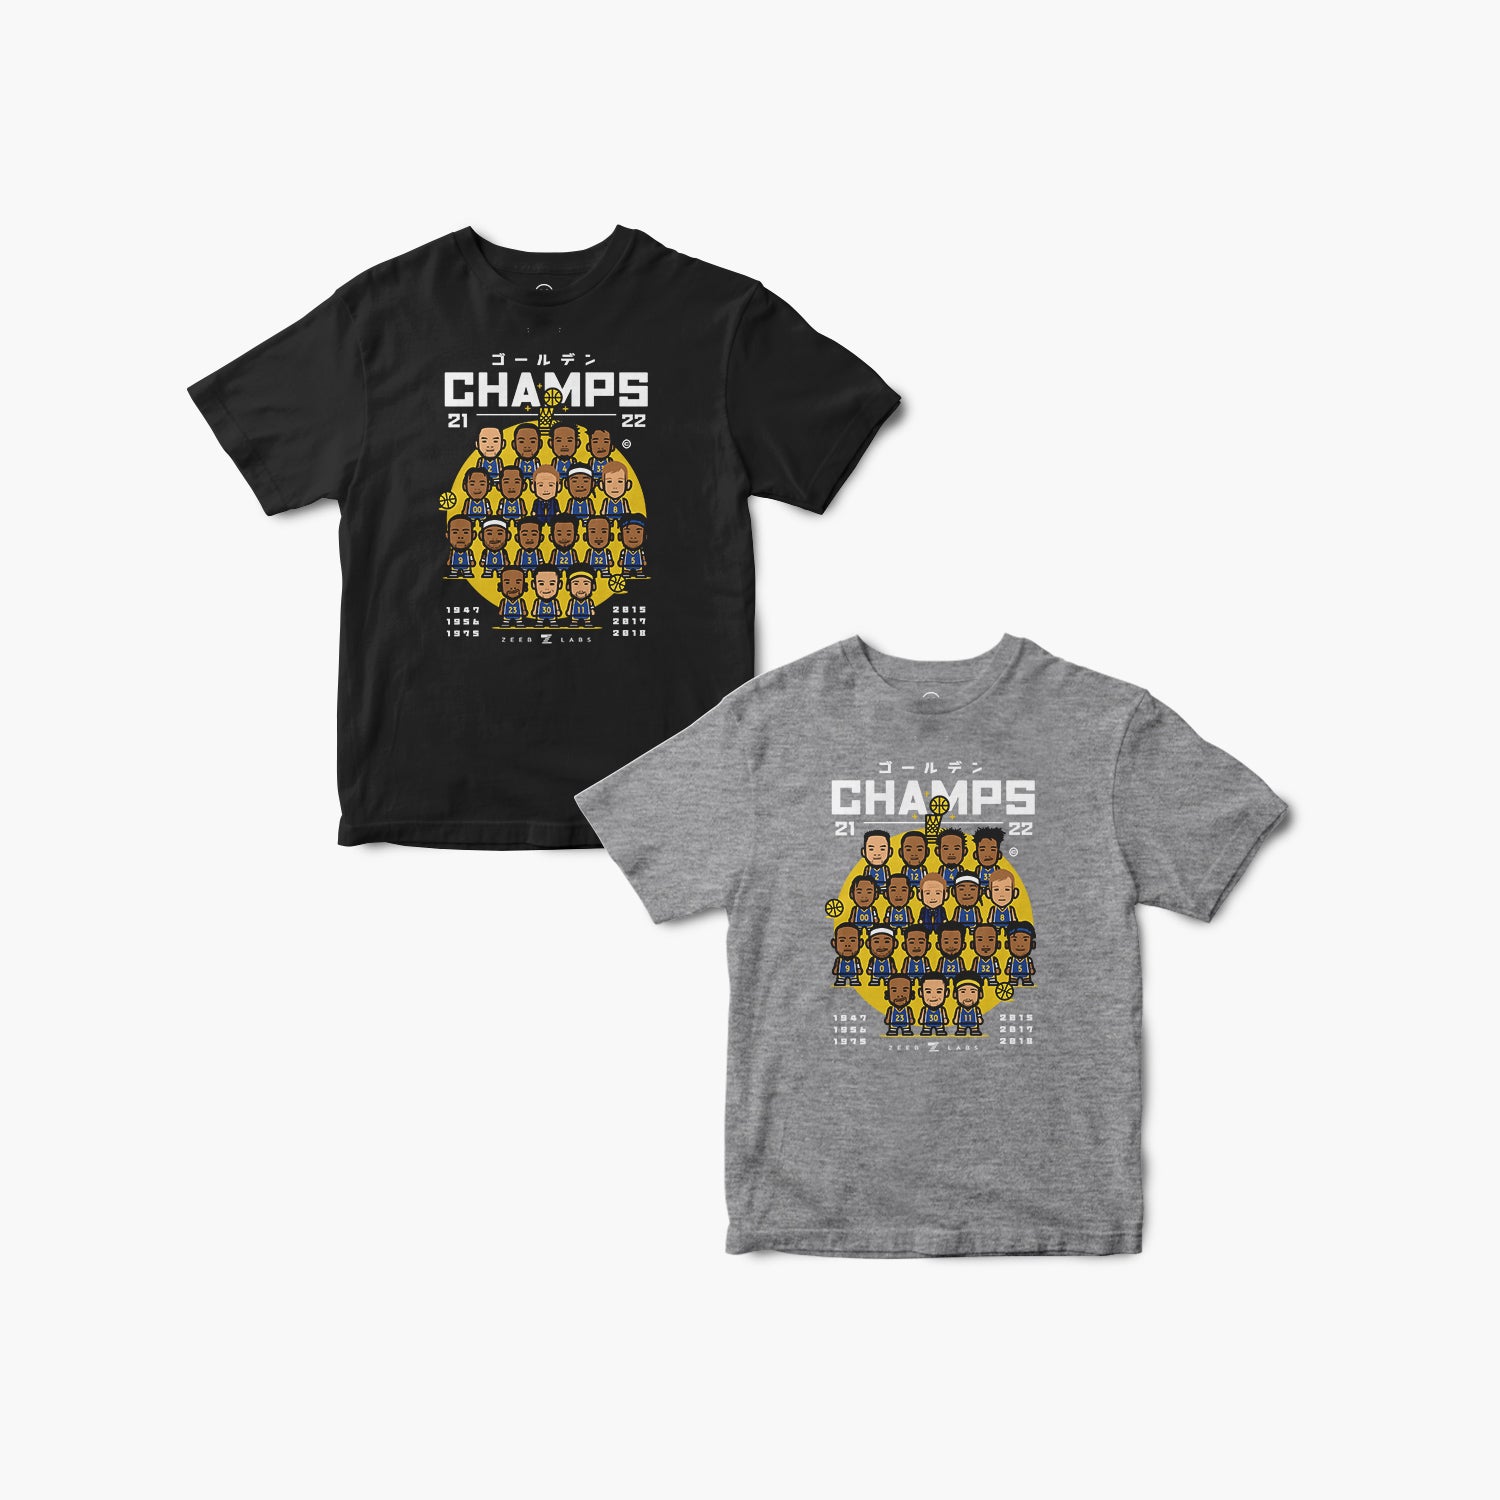 22Champs—Tee—Grey—optFront